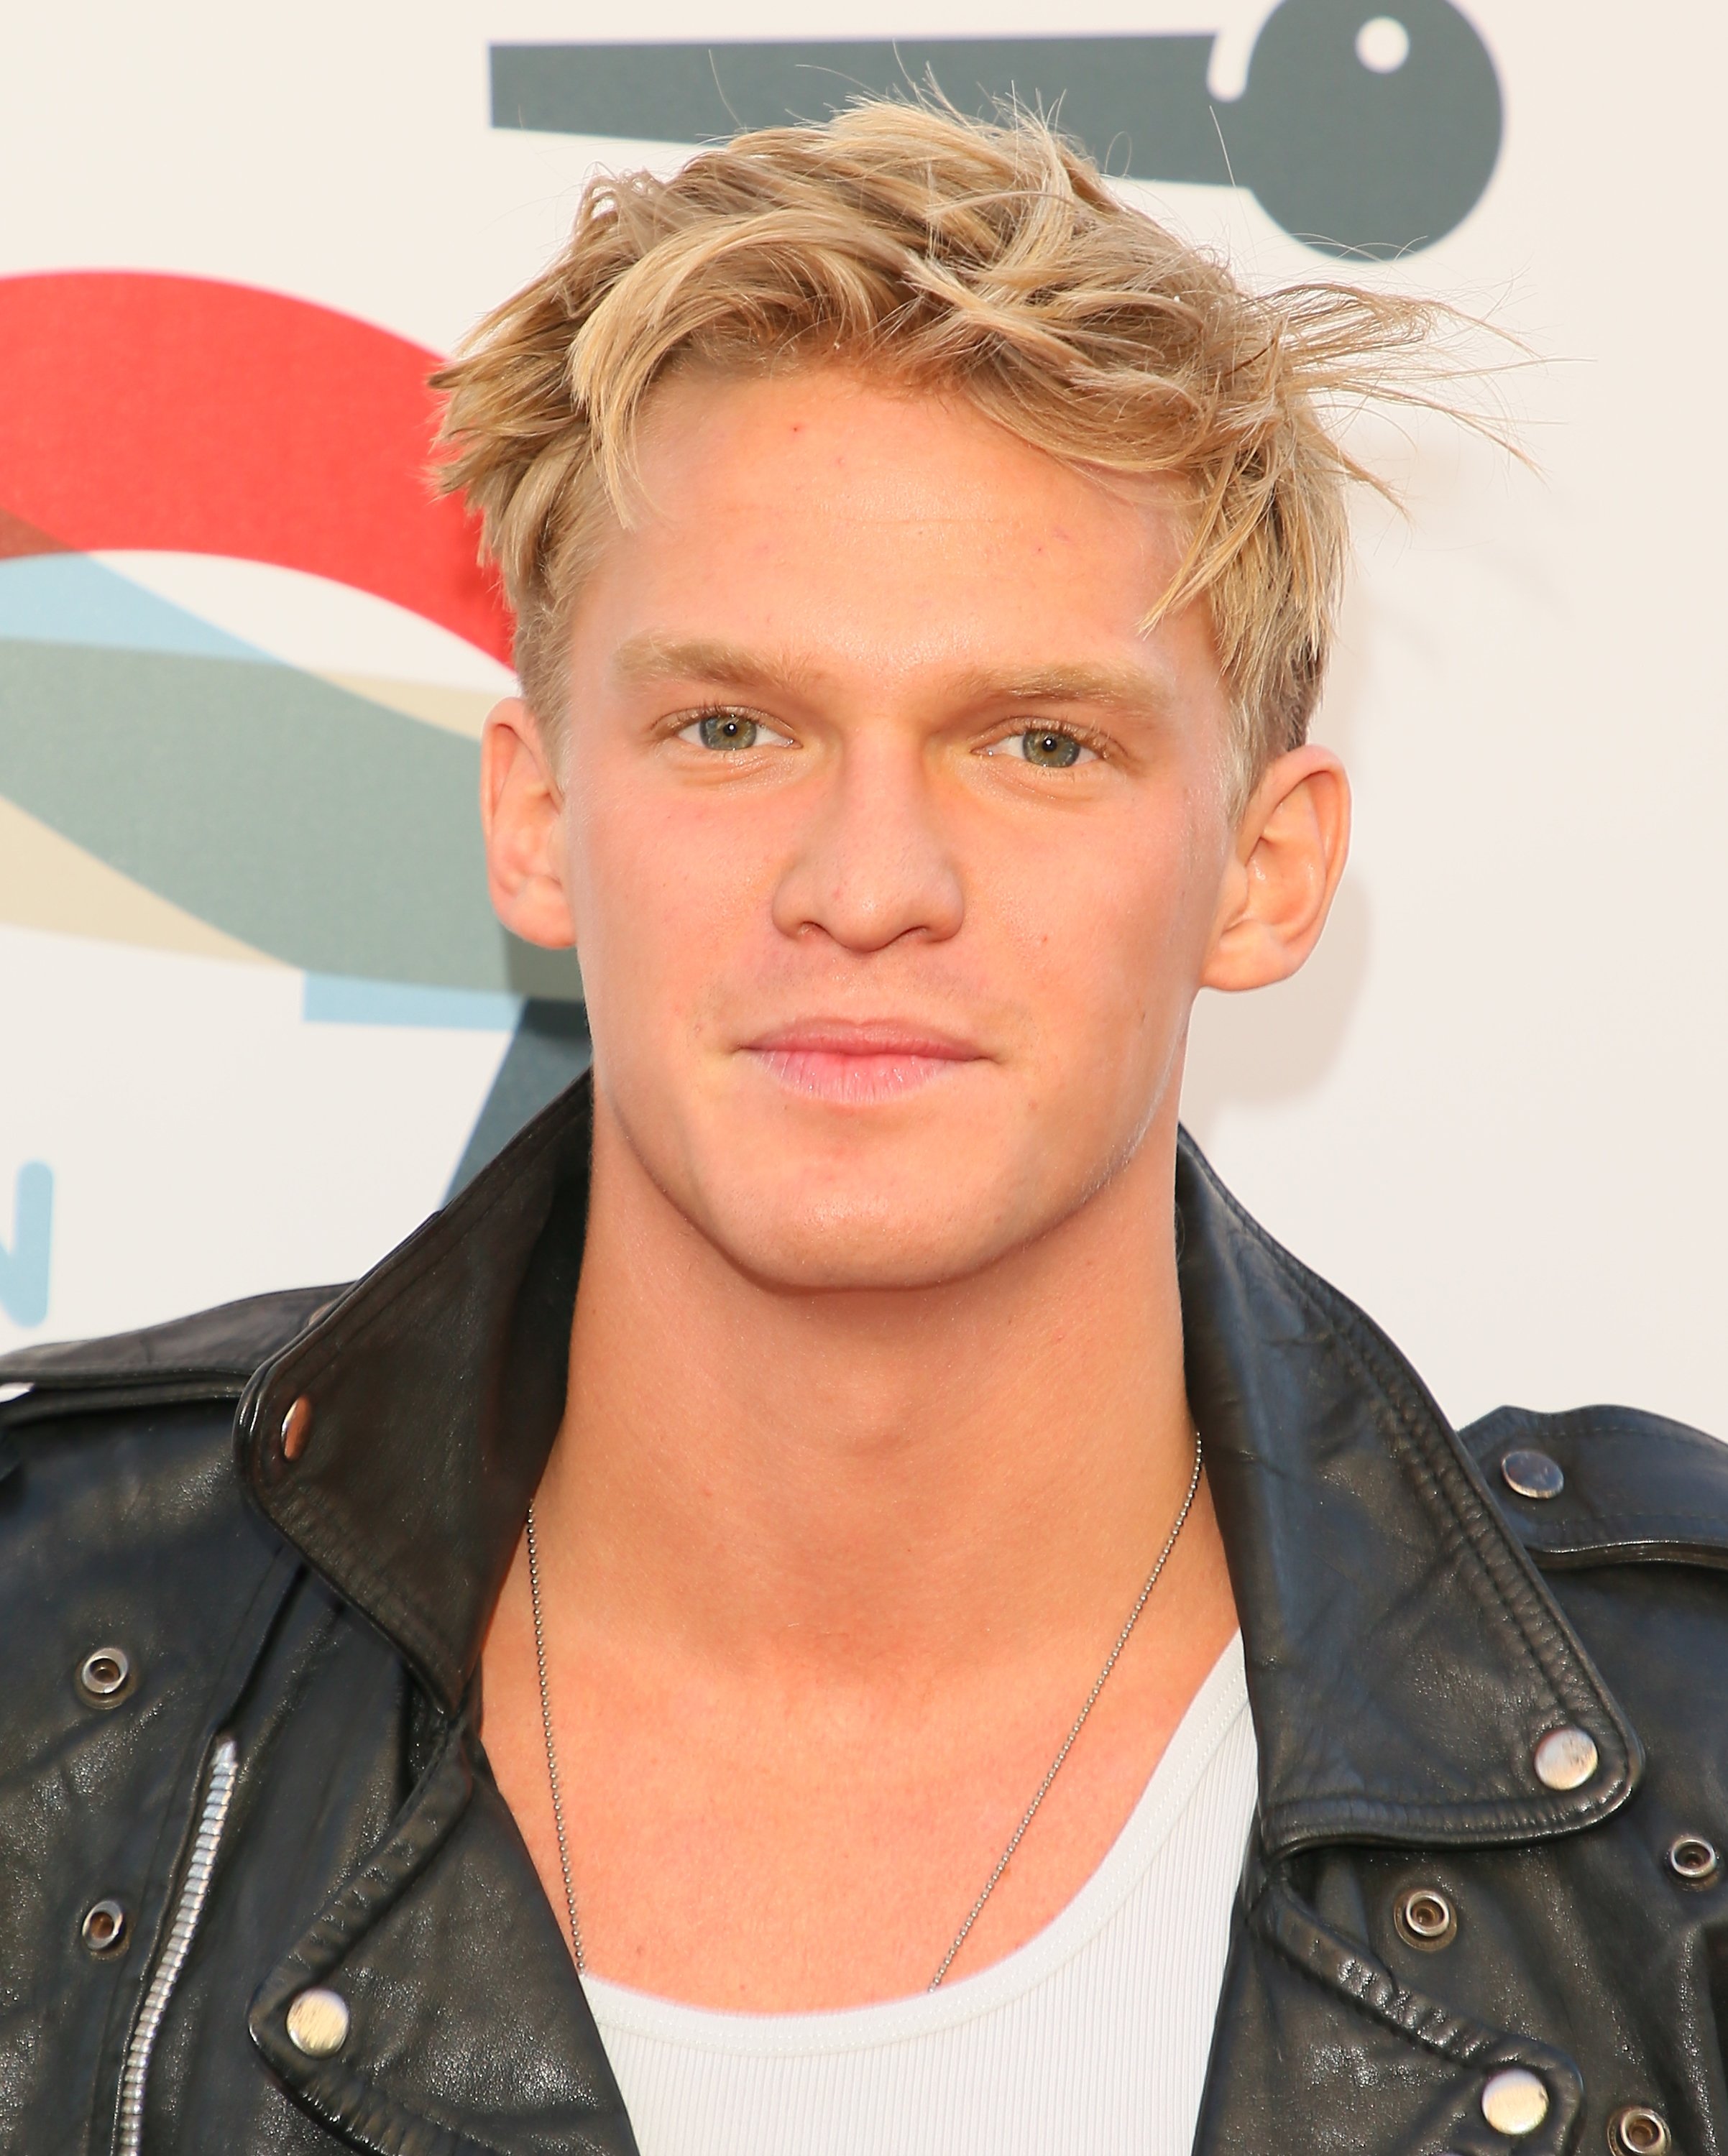 Cody Simpson on the red carpet